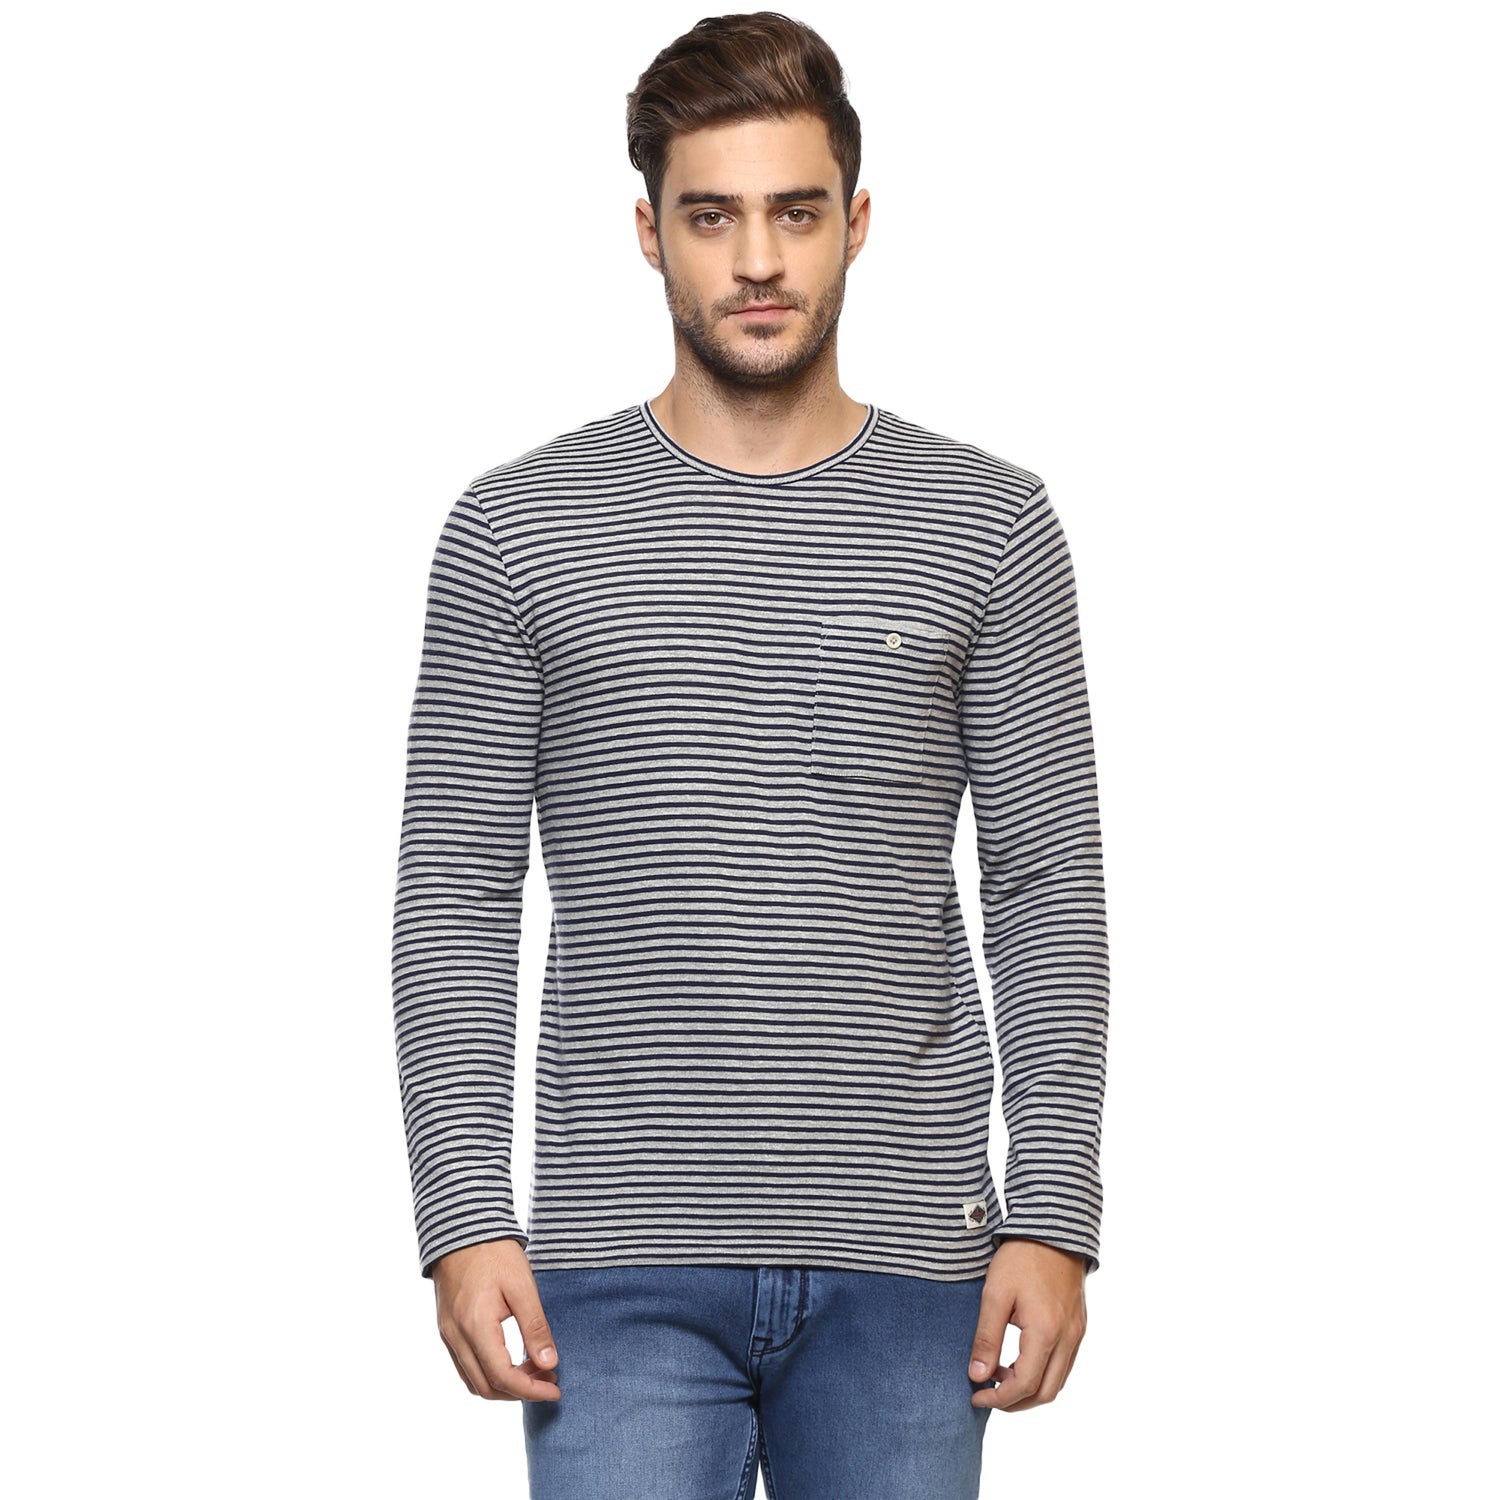 Grey and Navy Blue Striped Round Neck T-shirt (MENACE)